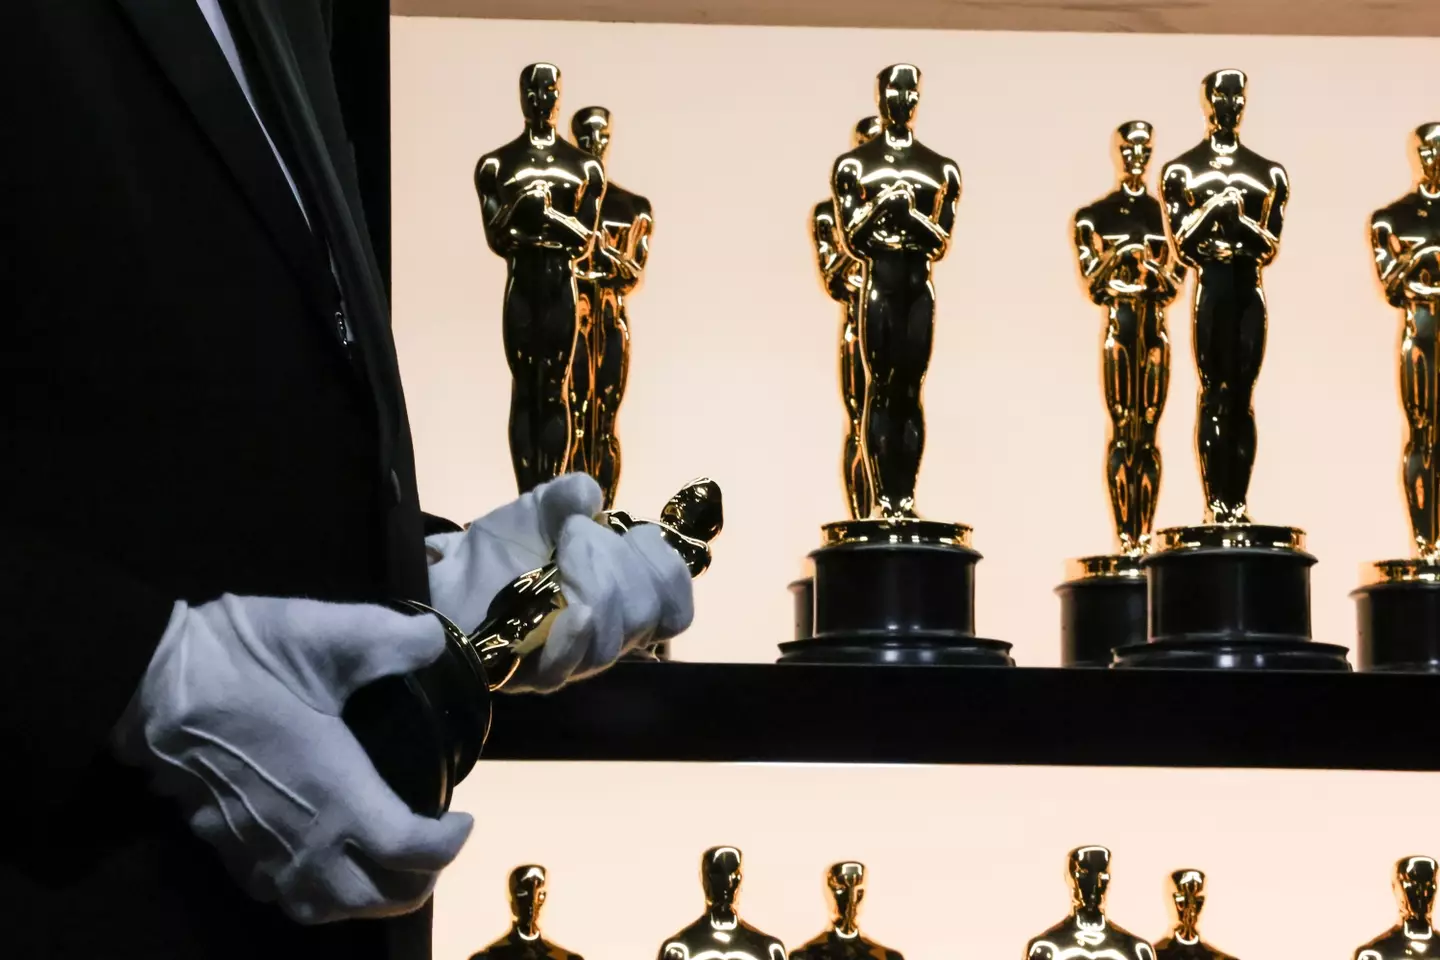 The 96th Academy Awards will take place on 10 March.